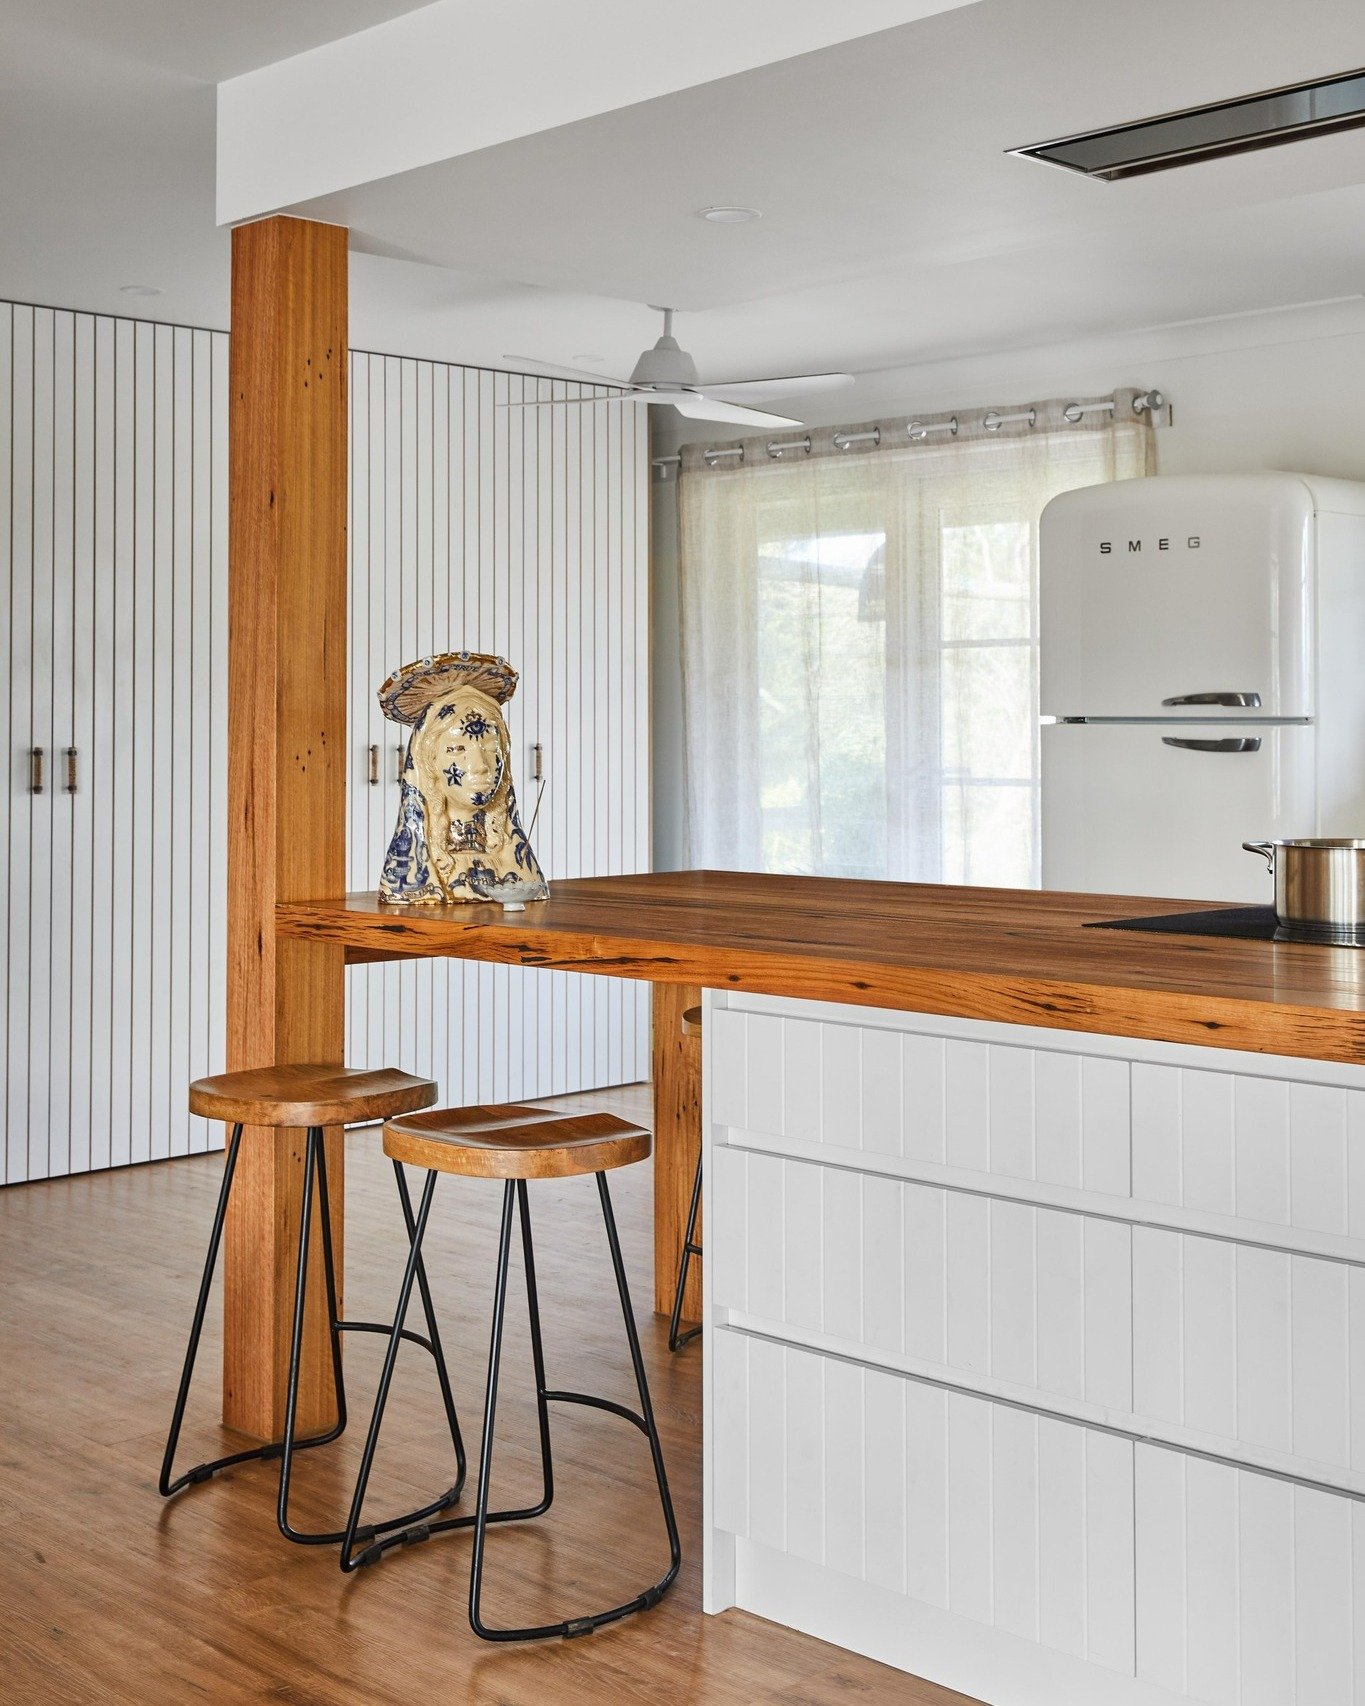 The creative owner of this beautiful home disguised a structural column as a statement timber post. Our talented team used their epic skills to magically create what appears to be a solid post.

#kitchendesign #furnituremakeraustralia #timberbenchtop